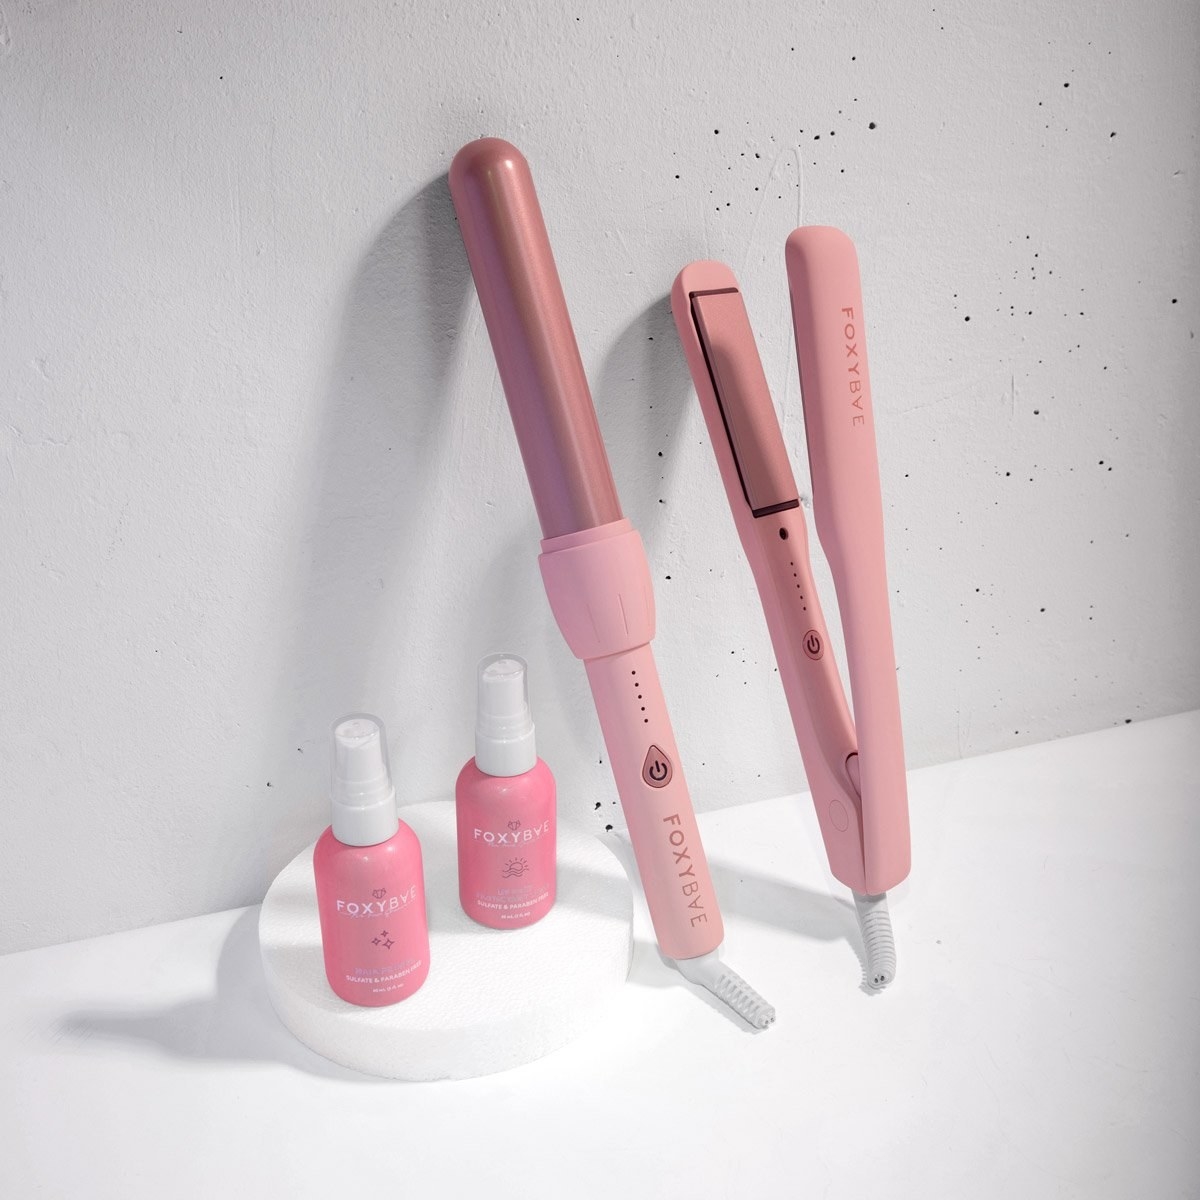 The Classic Holiday Gift Set with pink flat iron, pink curling wand, heat protectant spray, and hair primer in bottles